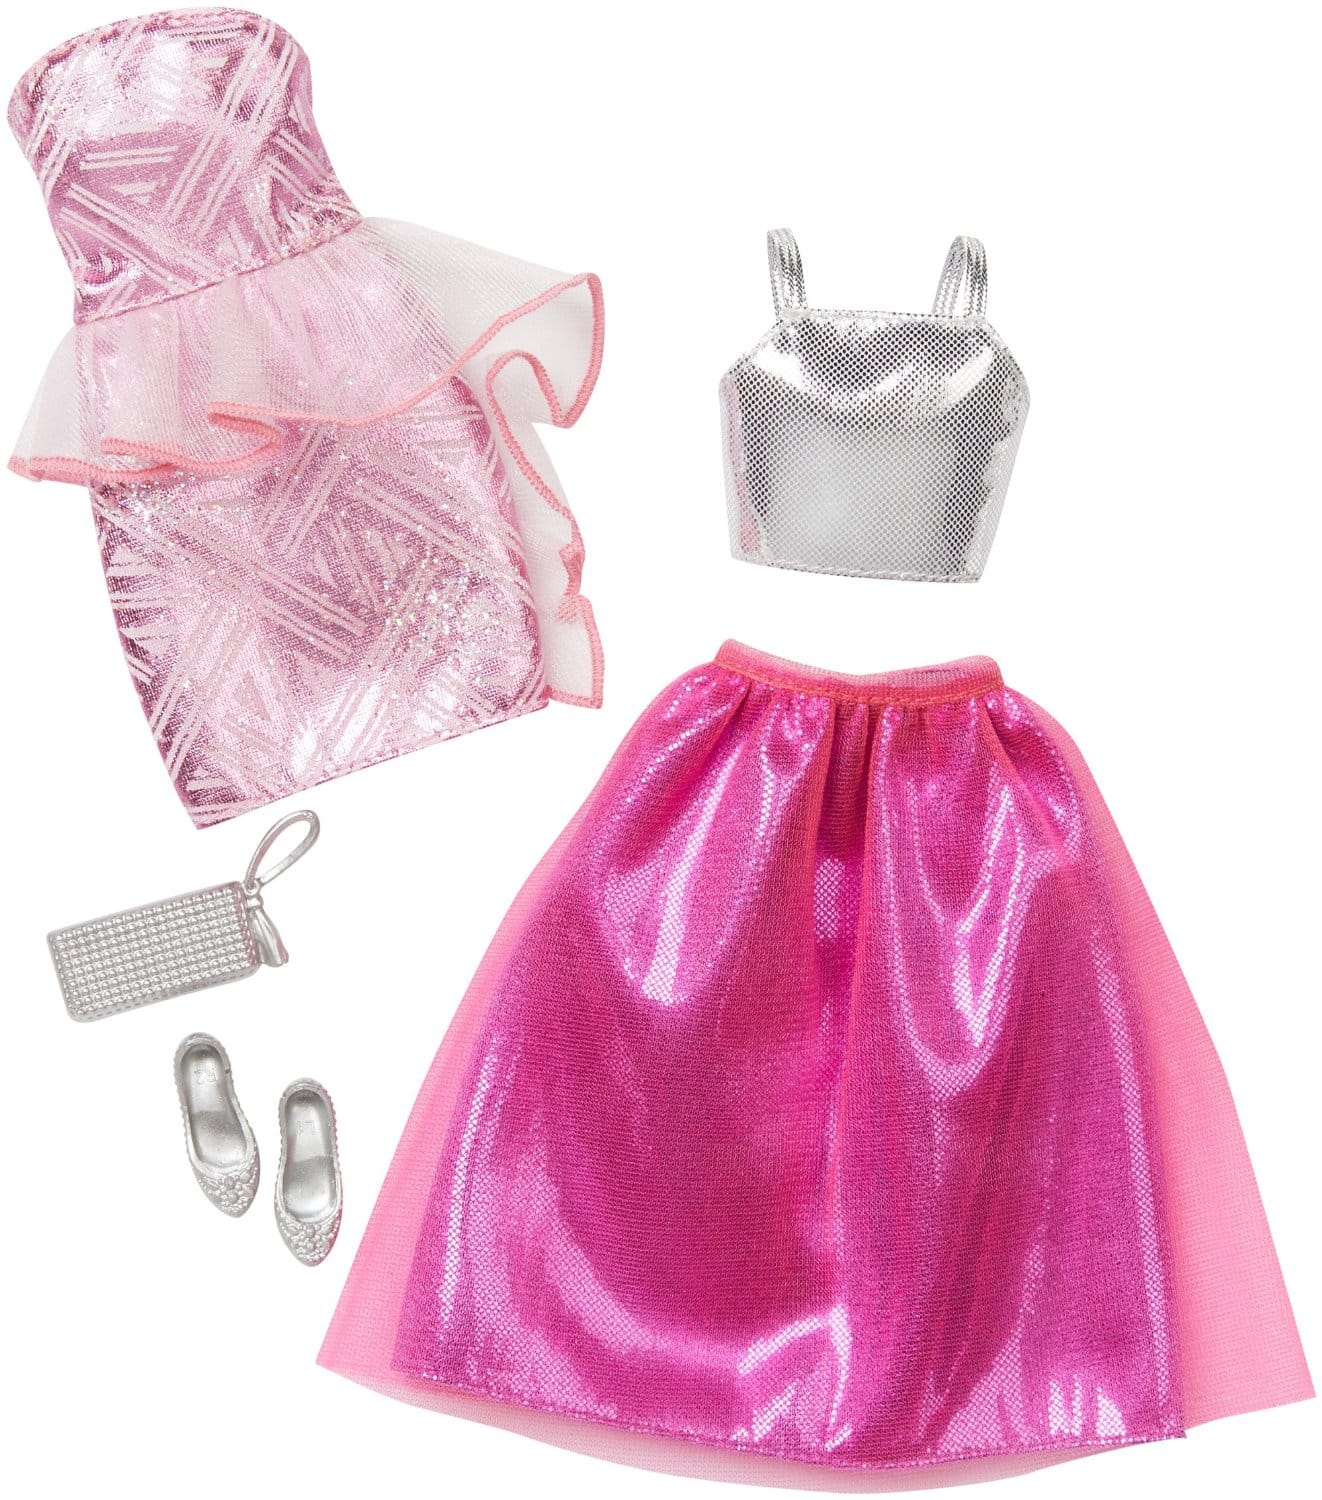 DEAL ALERT: Save up to to 68% off Select Barbie Items!!